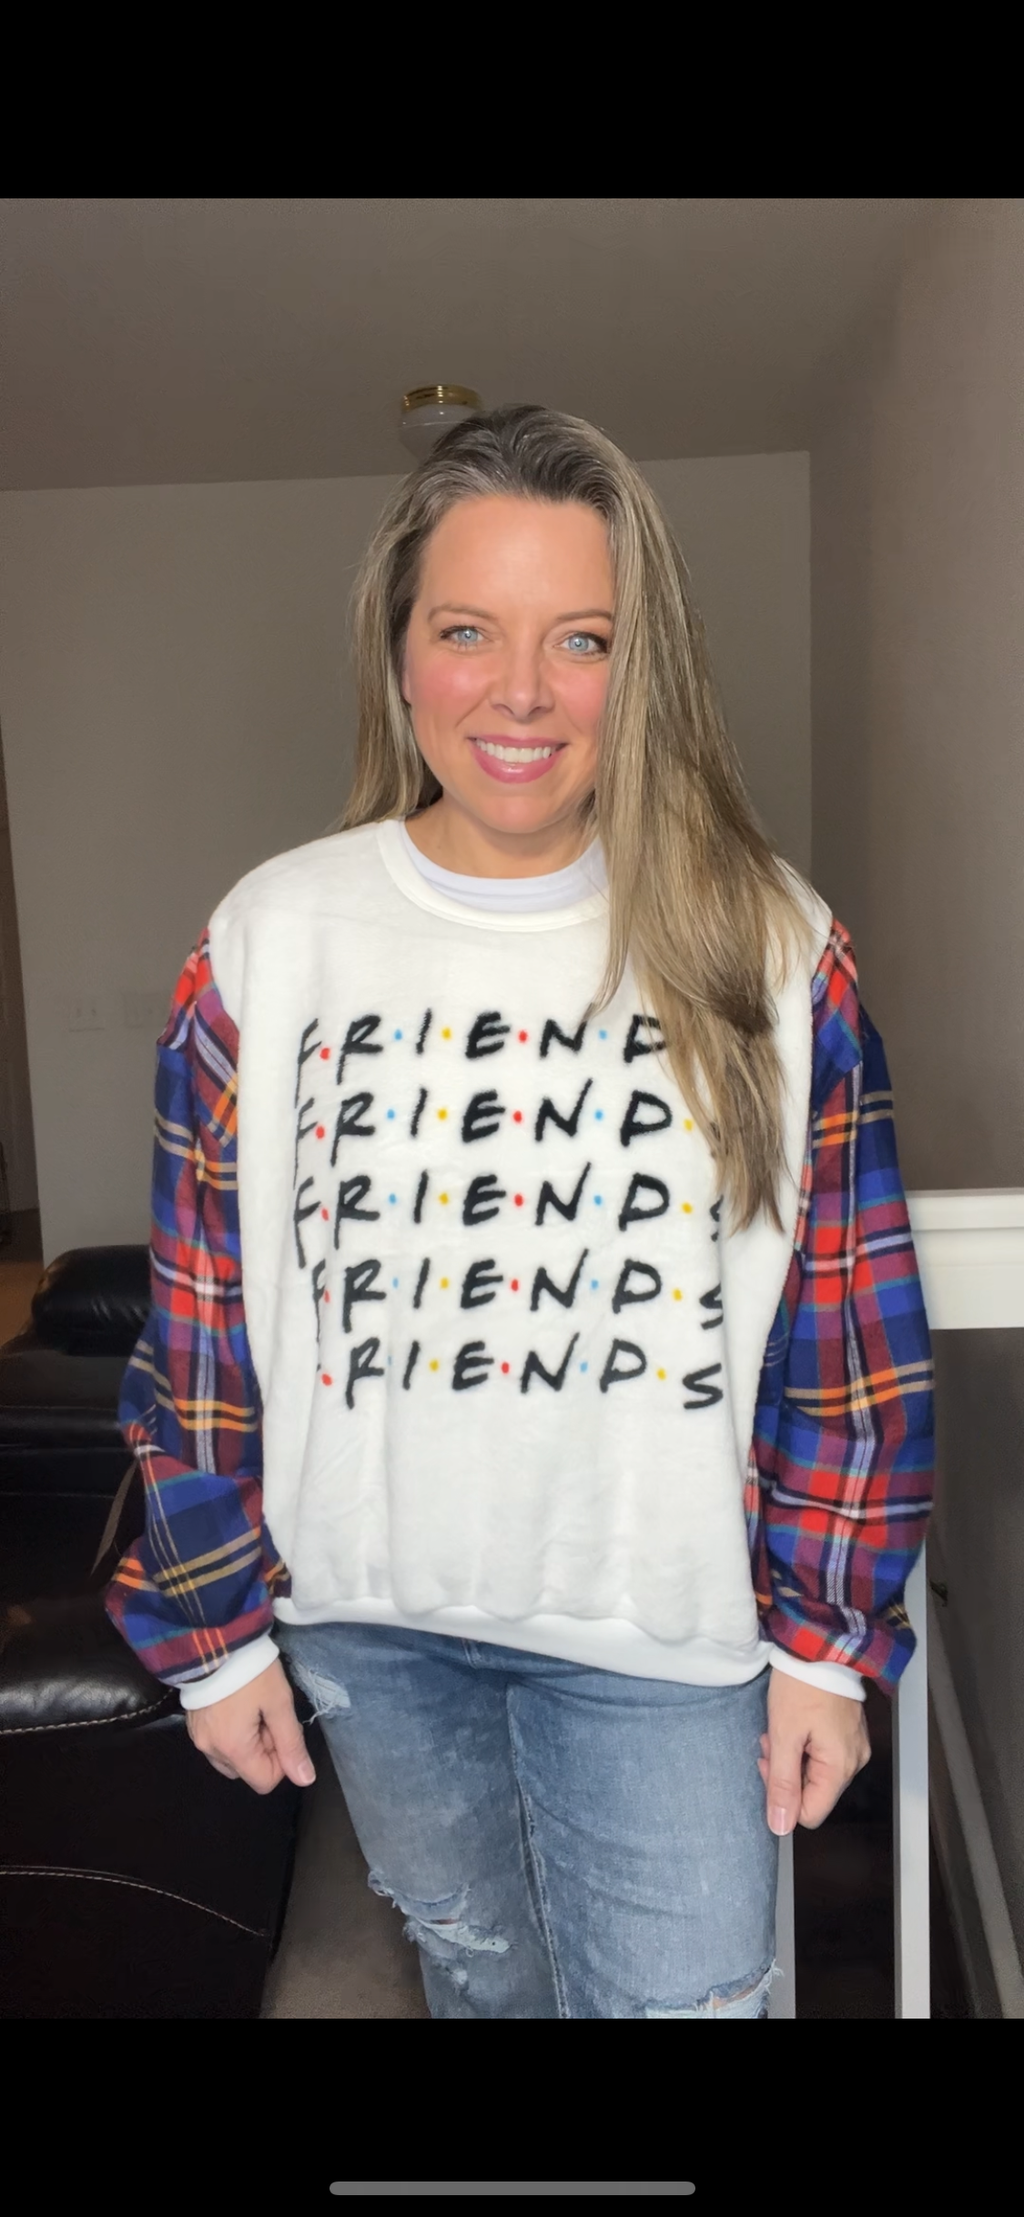 Upcycled Friends – women’s large – fuzzy sweatshirt with soft flannel sleeves